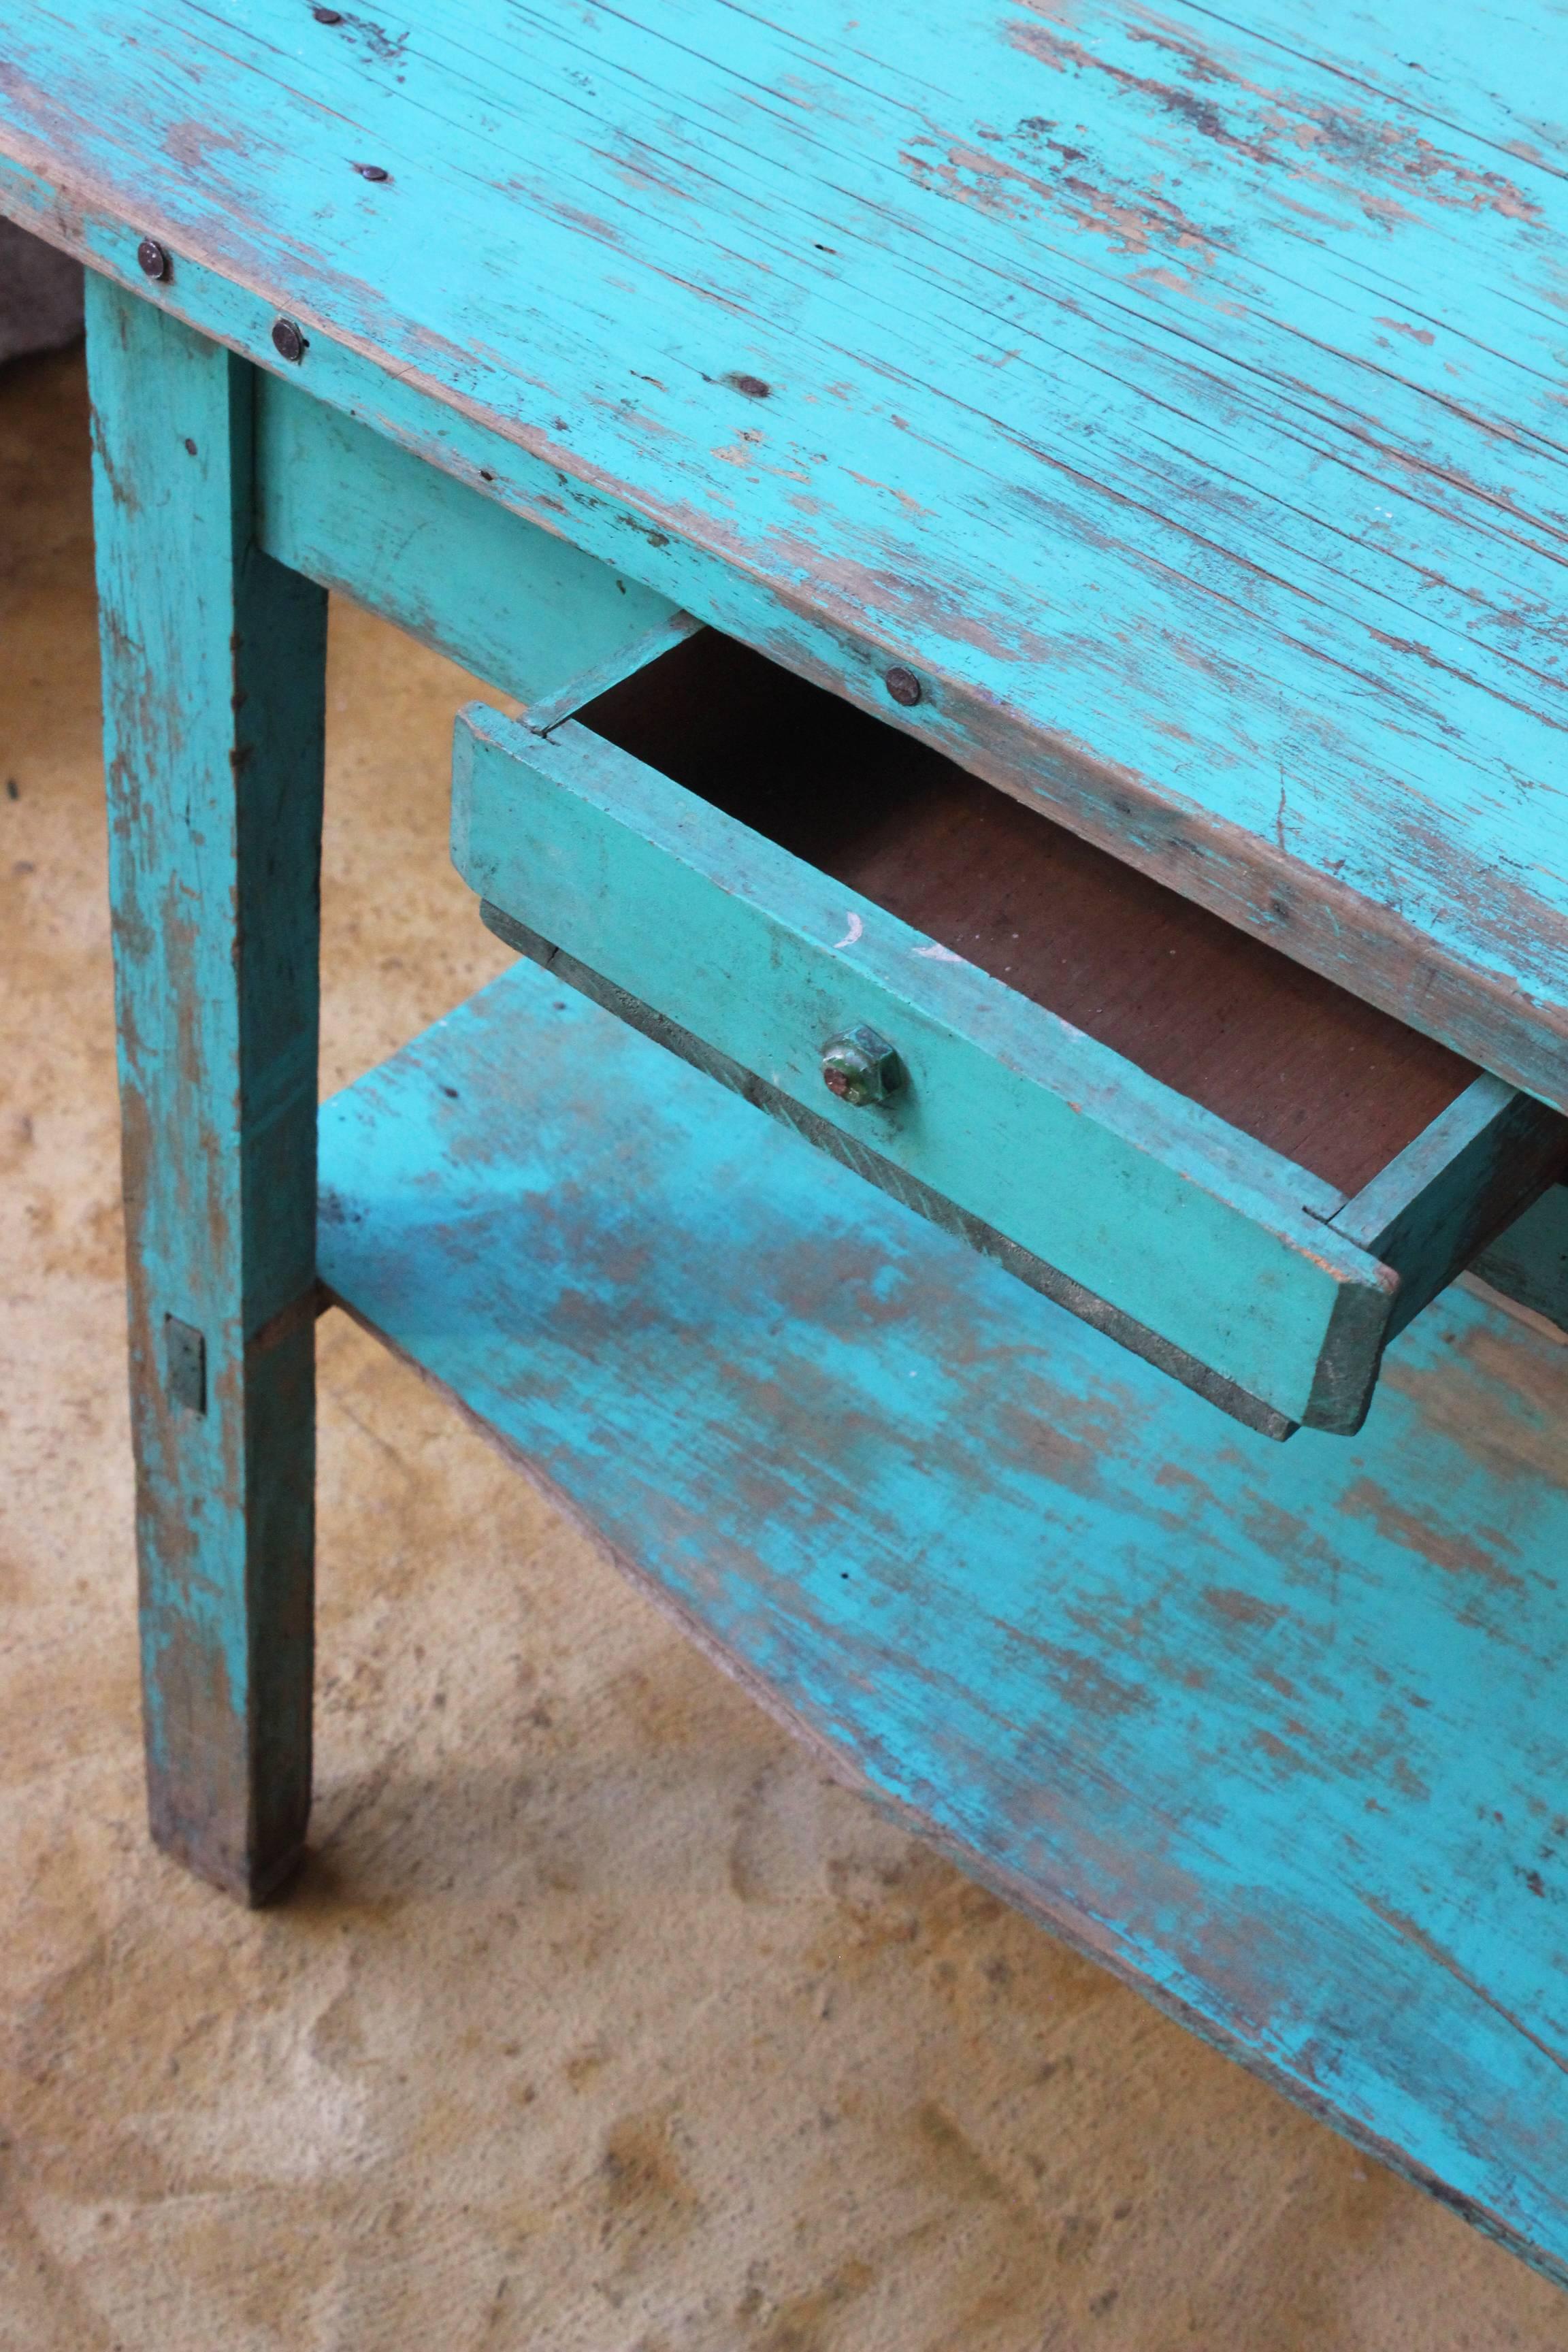 Early 20th century colorful farm table found in Western México, the table has some minor losses and color fading. Perfect for giving a colorful touch to a decoration project.